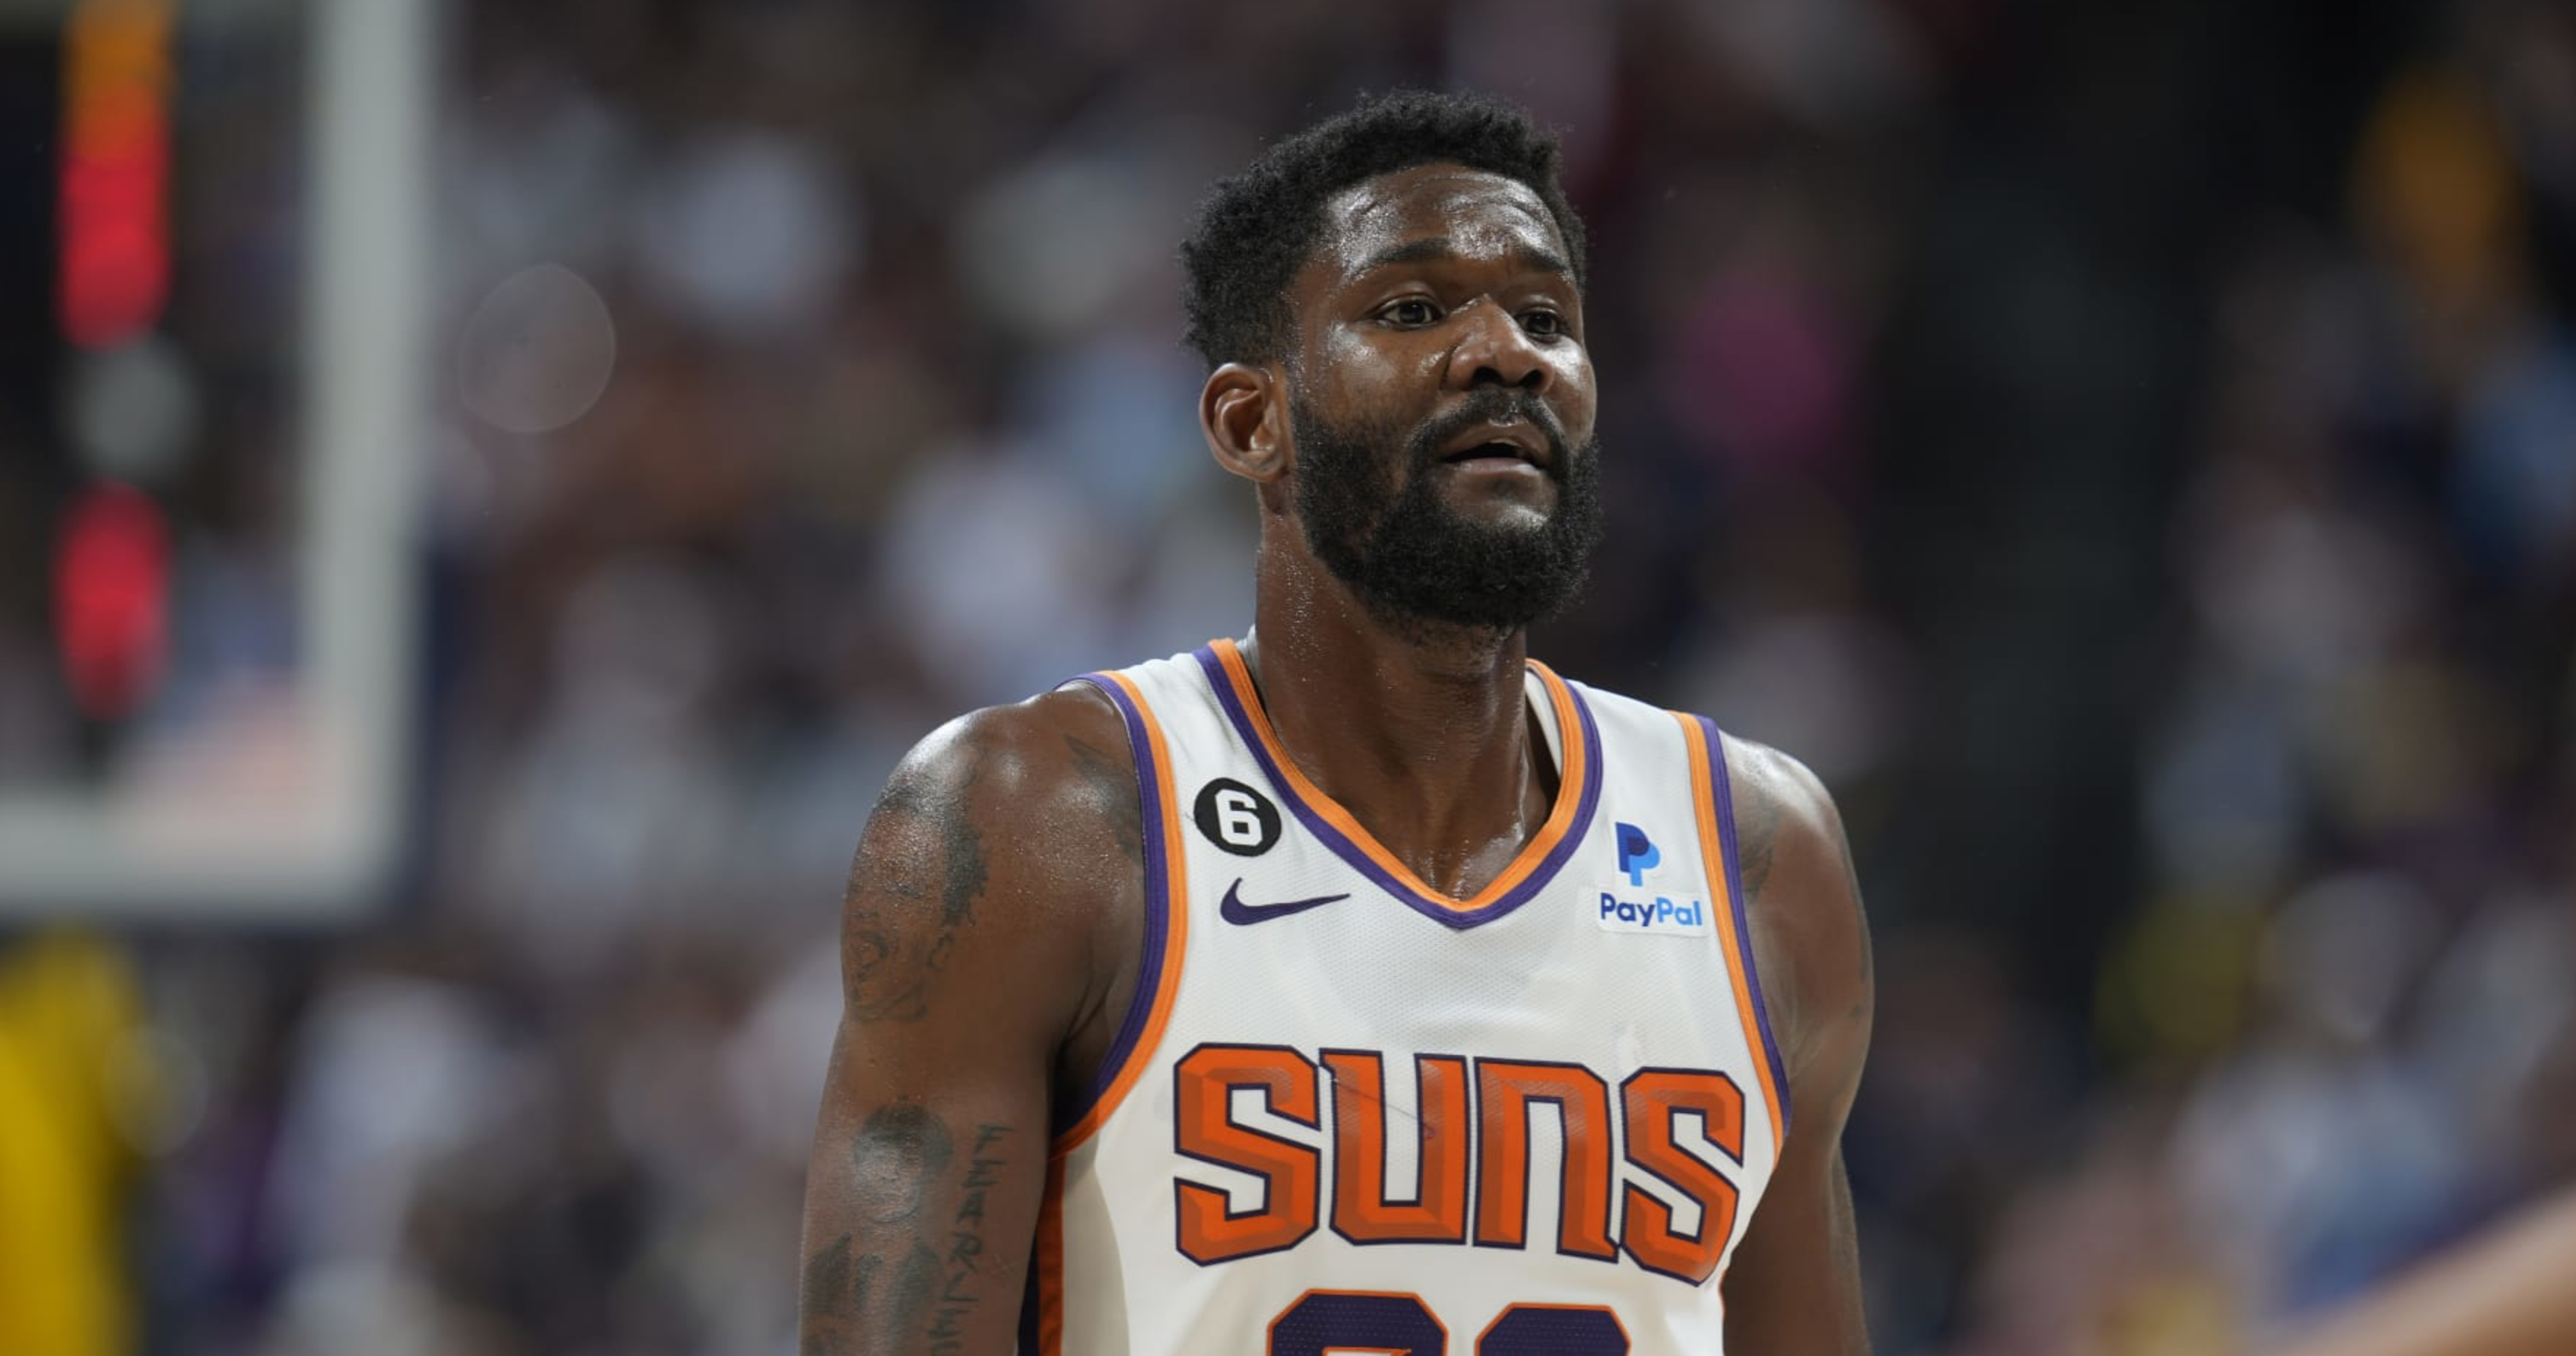 Trail Blazers Center Deandre Ayton 'Excited' For New Role in